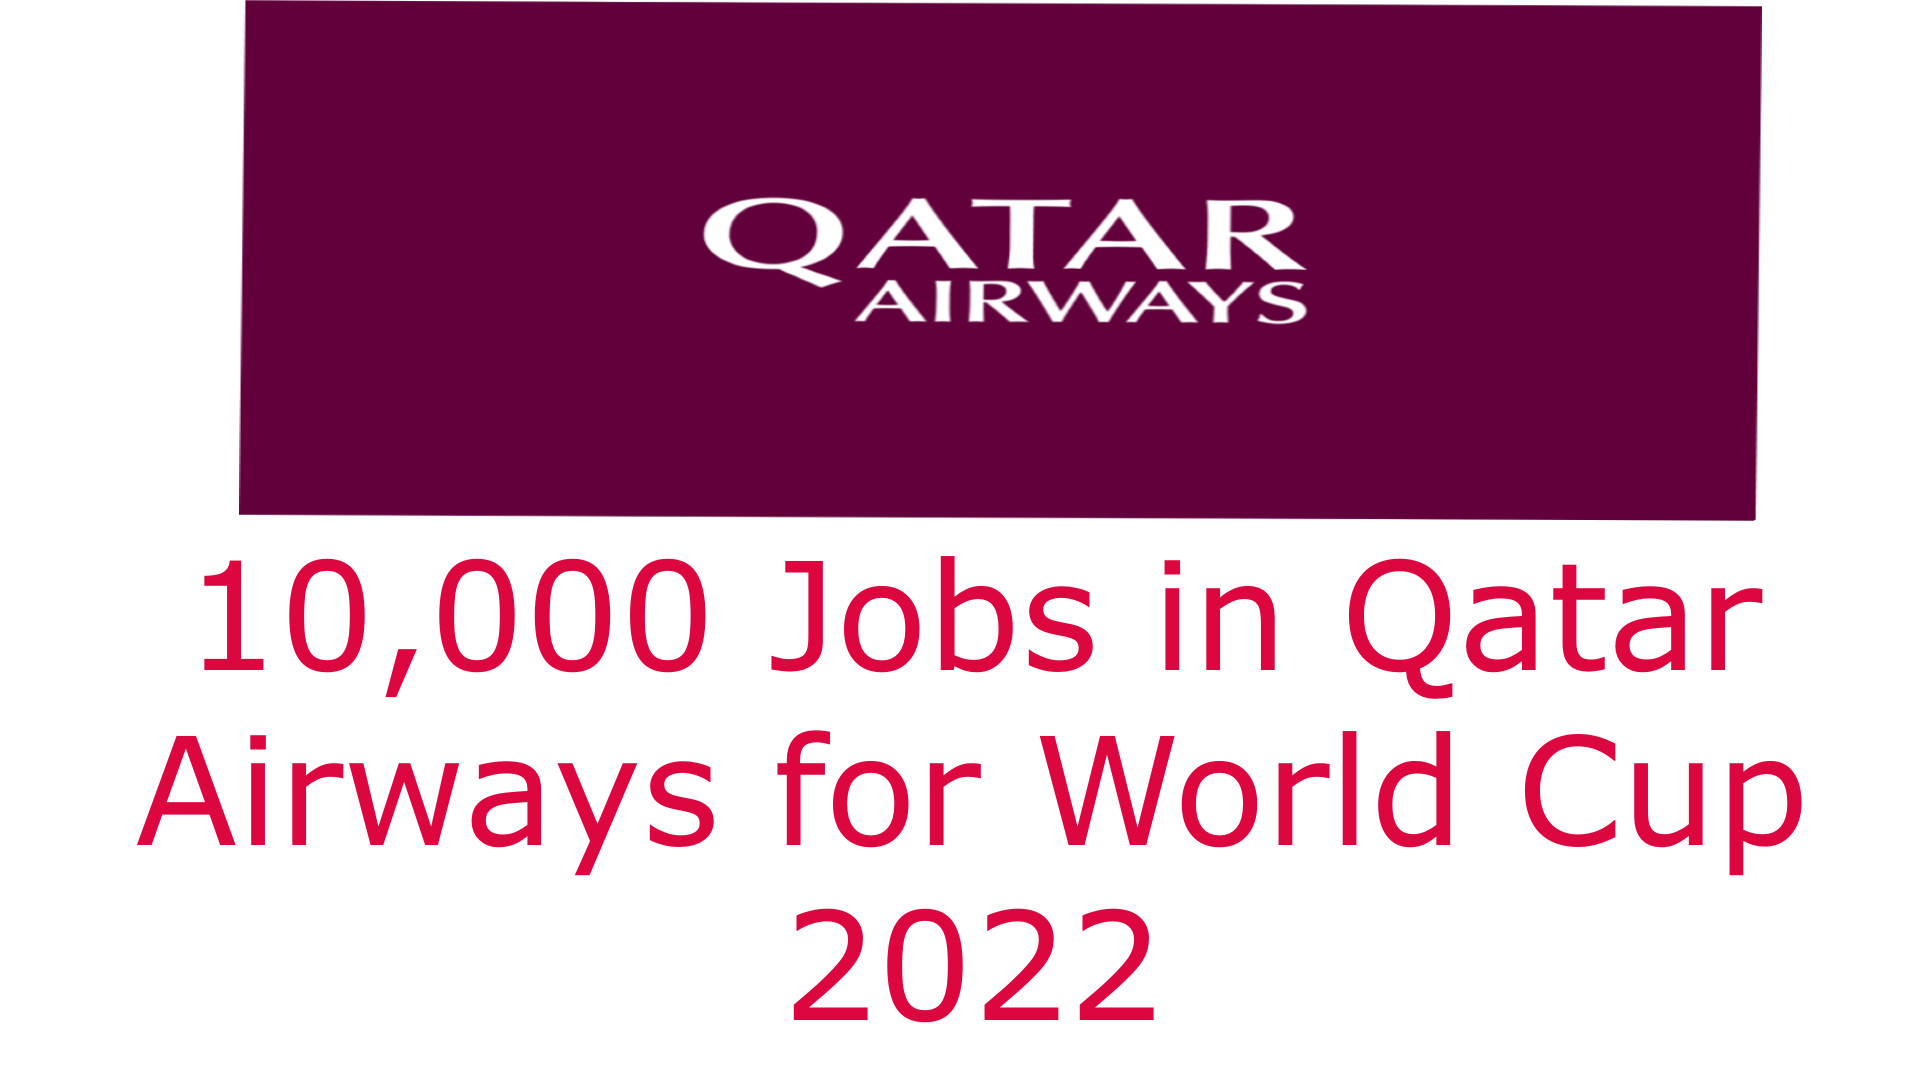 Qatar Airways to hire 10000 employees for World Cup 2022